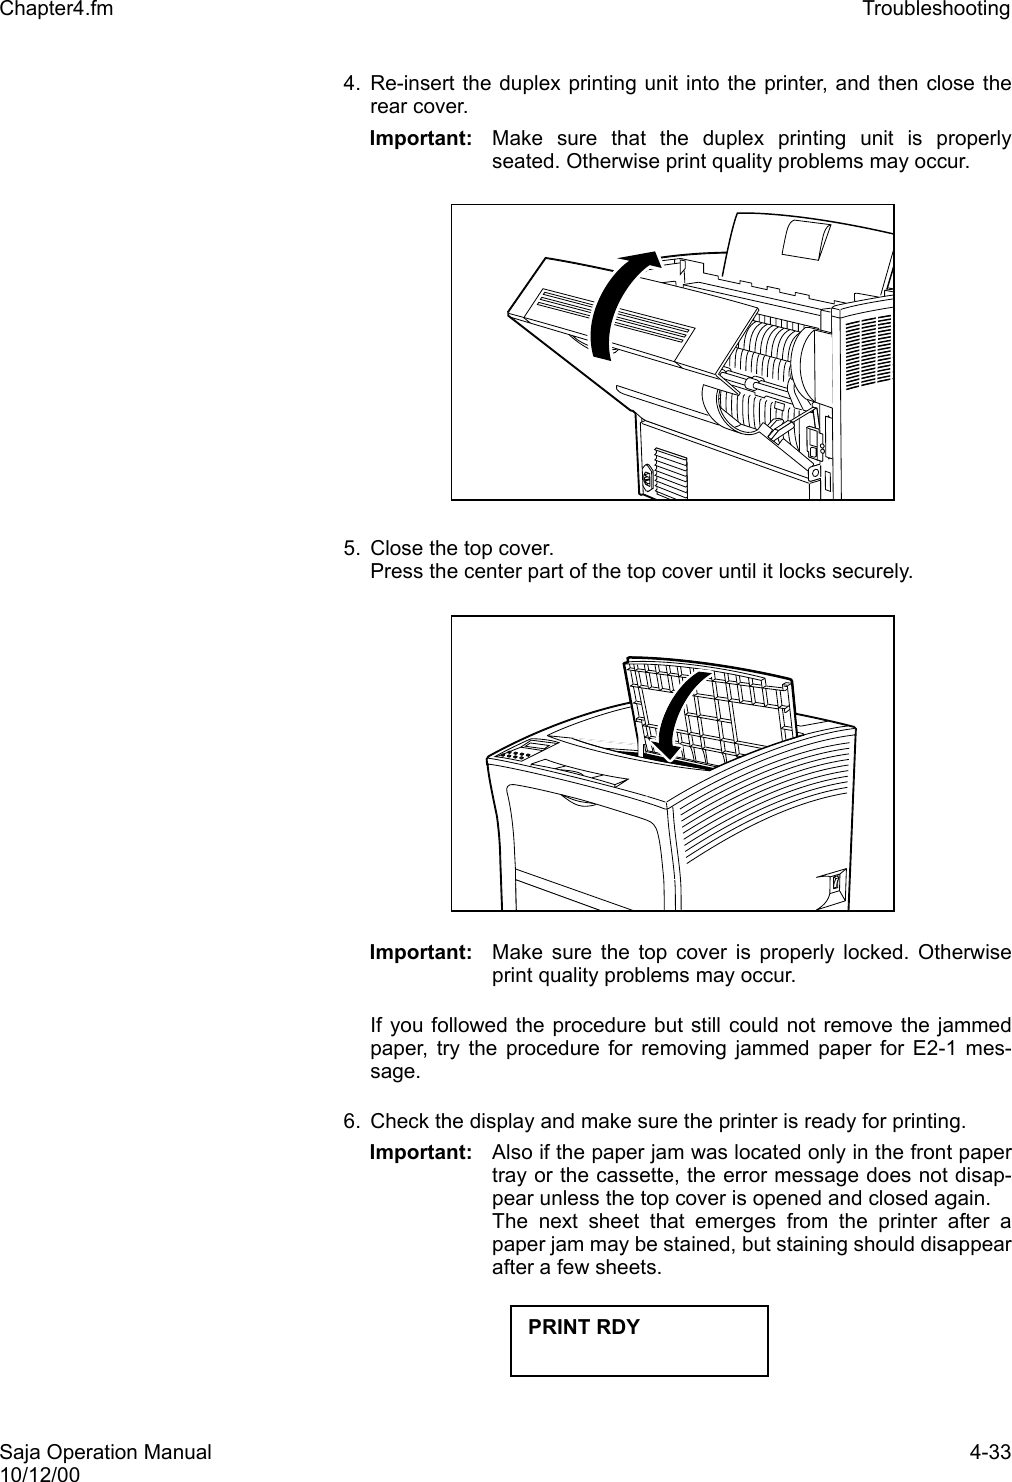 Saja Operation Manual 4-3310/12/00Chapter4.fm Troubleshooting 4. Re-insert the duplex printing unit into the printer, and then close therear cover. Important: Make sure that the duplex printing unit is properlyseated. Otherwise print quality problems may occur. 5. Close the top cover.Press the center part of the top cover until it locks securely.Important: Make sure the top cover is properly locked. Otherwiseprint quality problems may occur. If you followed the procedure but still could not remove the jammedpaper, try the procedure for removing jammed paper for E2-1 mes-sage.6. Check the display and make sure the printer is ready for printing. Important: Also if the paper jam was located only in the front papertray or the cassette, the error message does not disap-pear unless the top cover is opened and closed again. The next sheet that emerges from the printer after apaper jam may be stained, but staining should disappearafter a few sheets. PRINT RDY